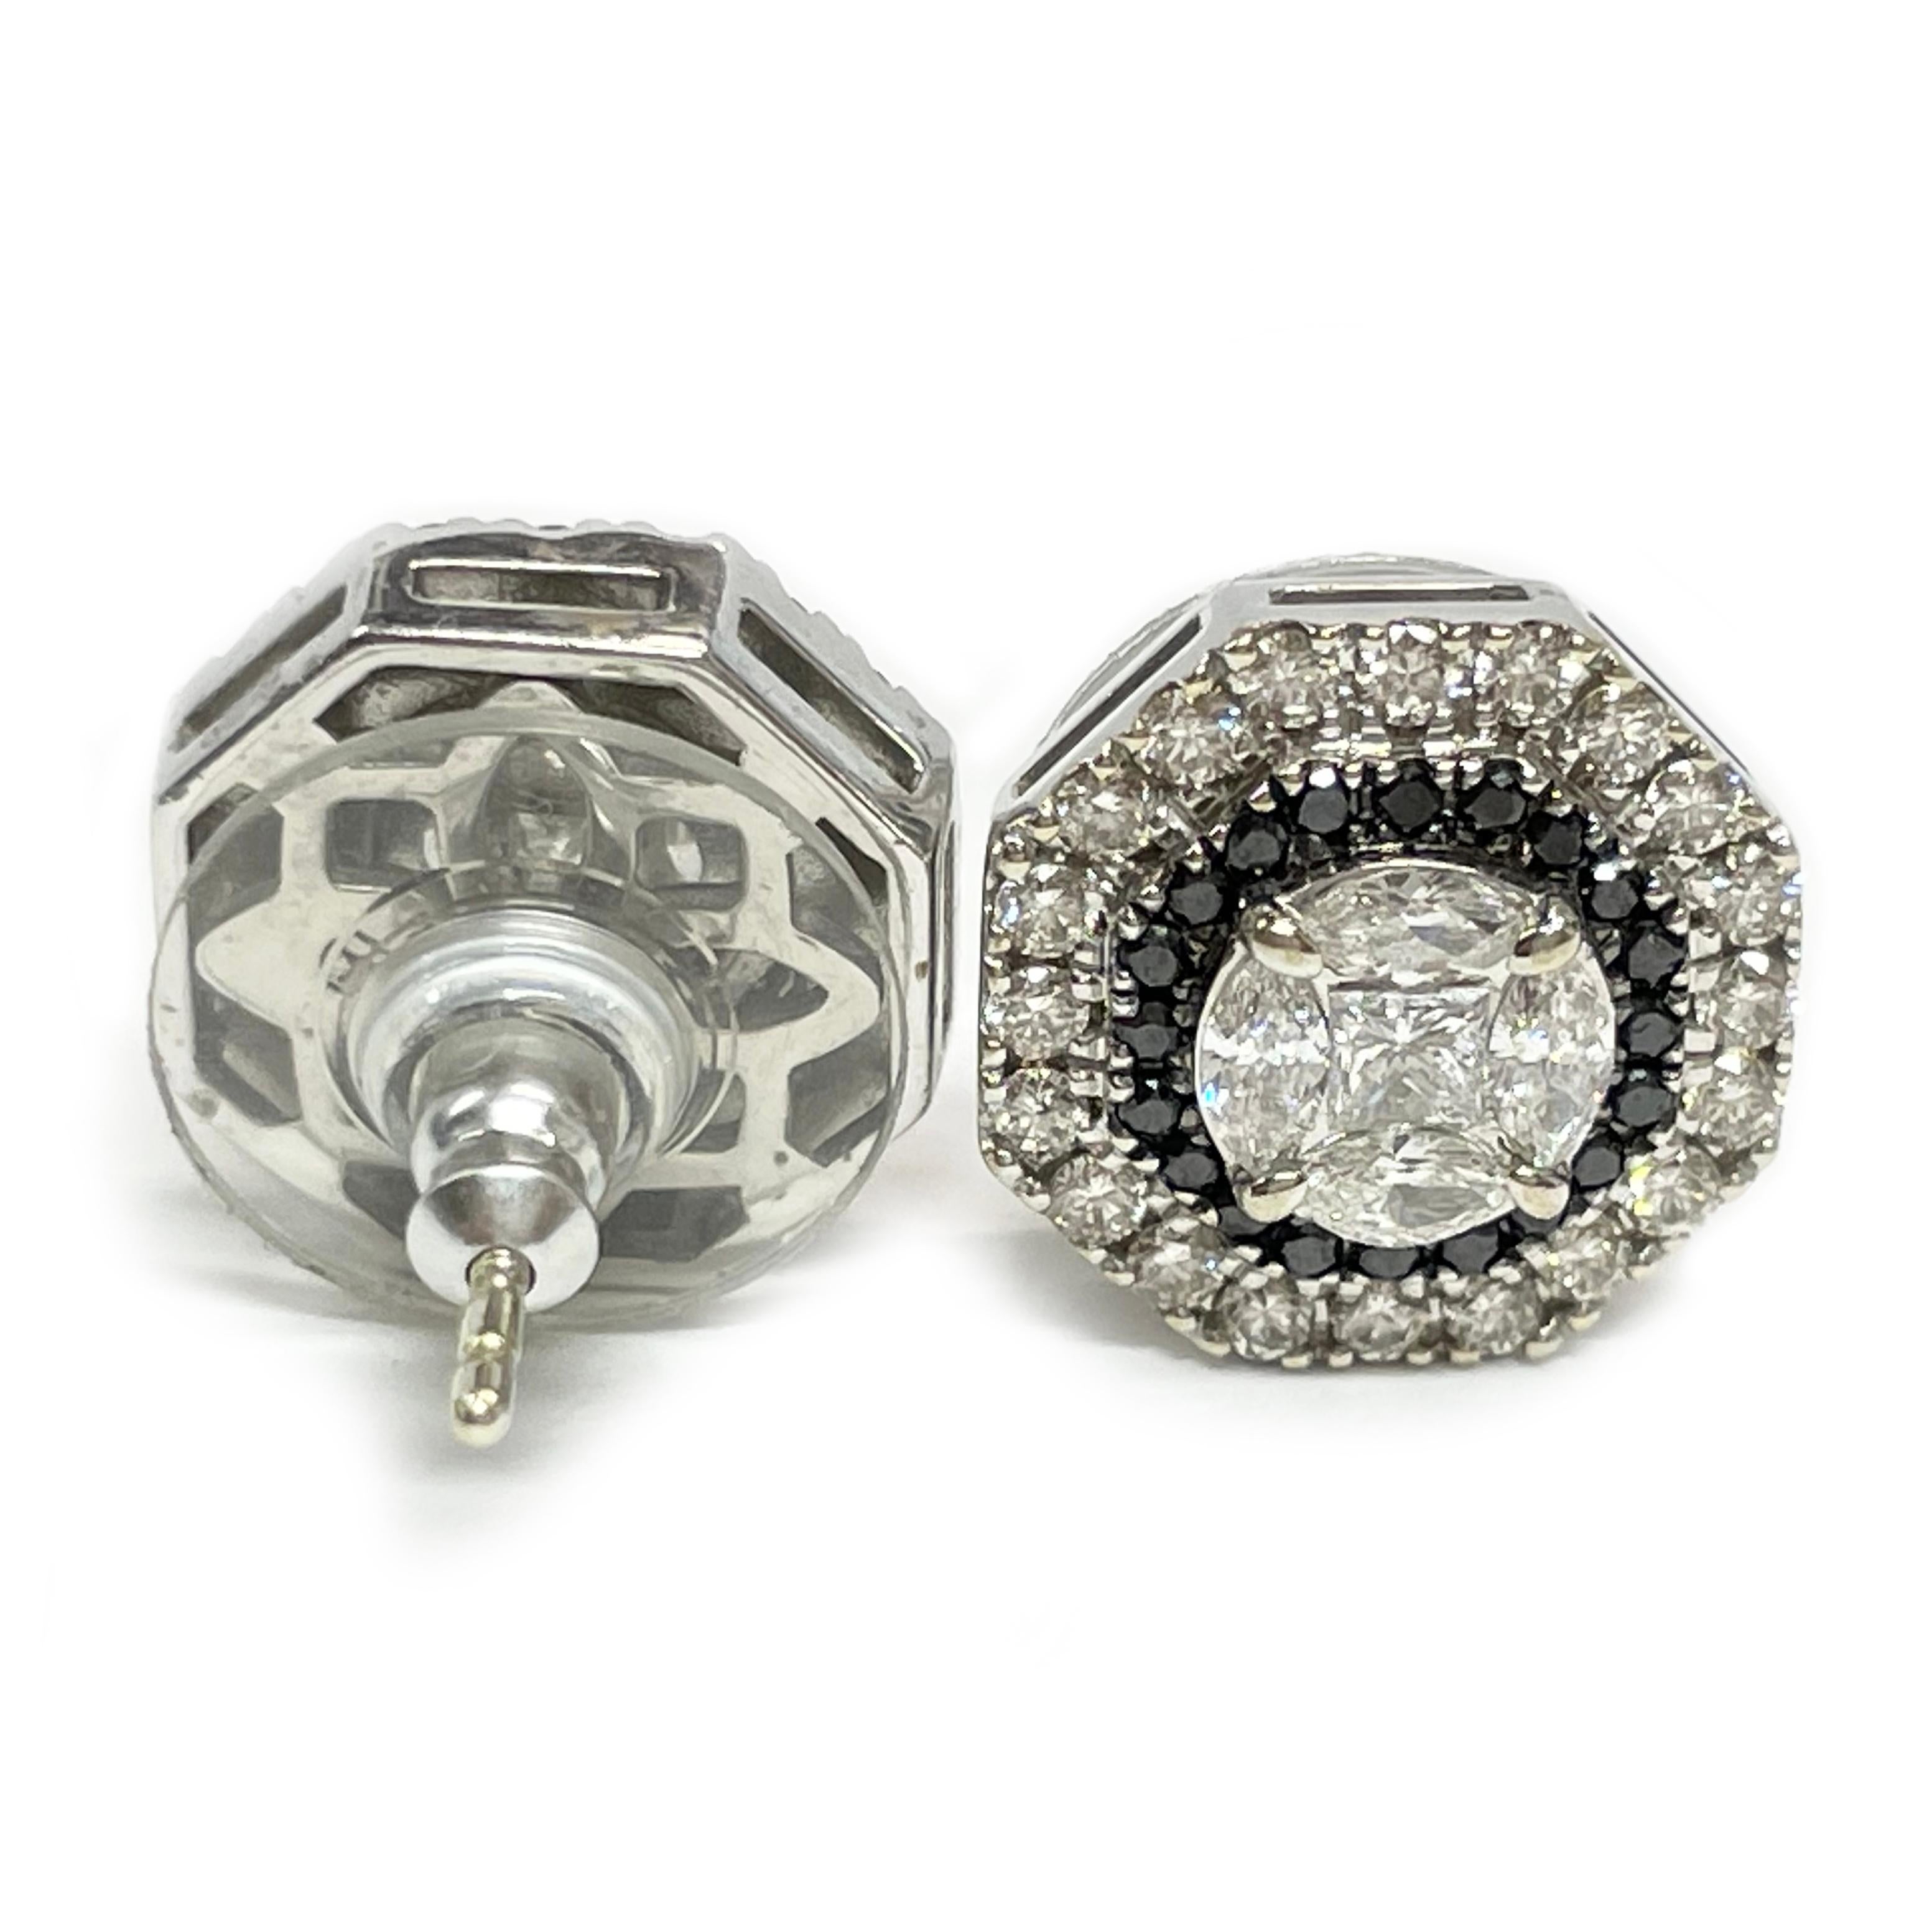 14 Karat white gold black and white diamond stud earrings. The octagon shaped earrings feature a combined carat total weight of 1.84ctw. There are thirty-eight 1.72mm round white diamonds, forty 1.56mm round black diamonds, eight 3 x 1.5mm marquise